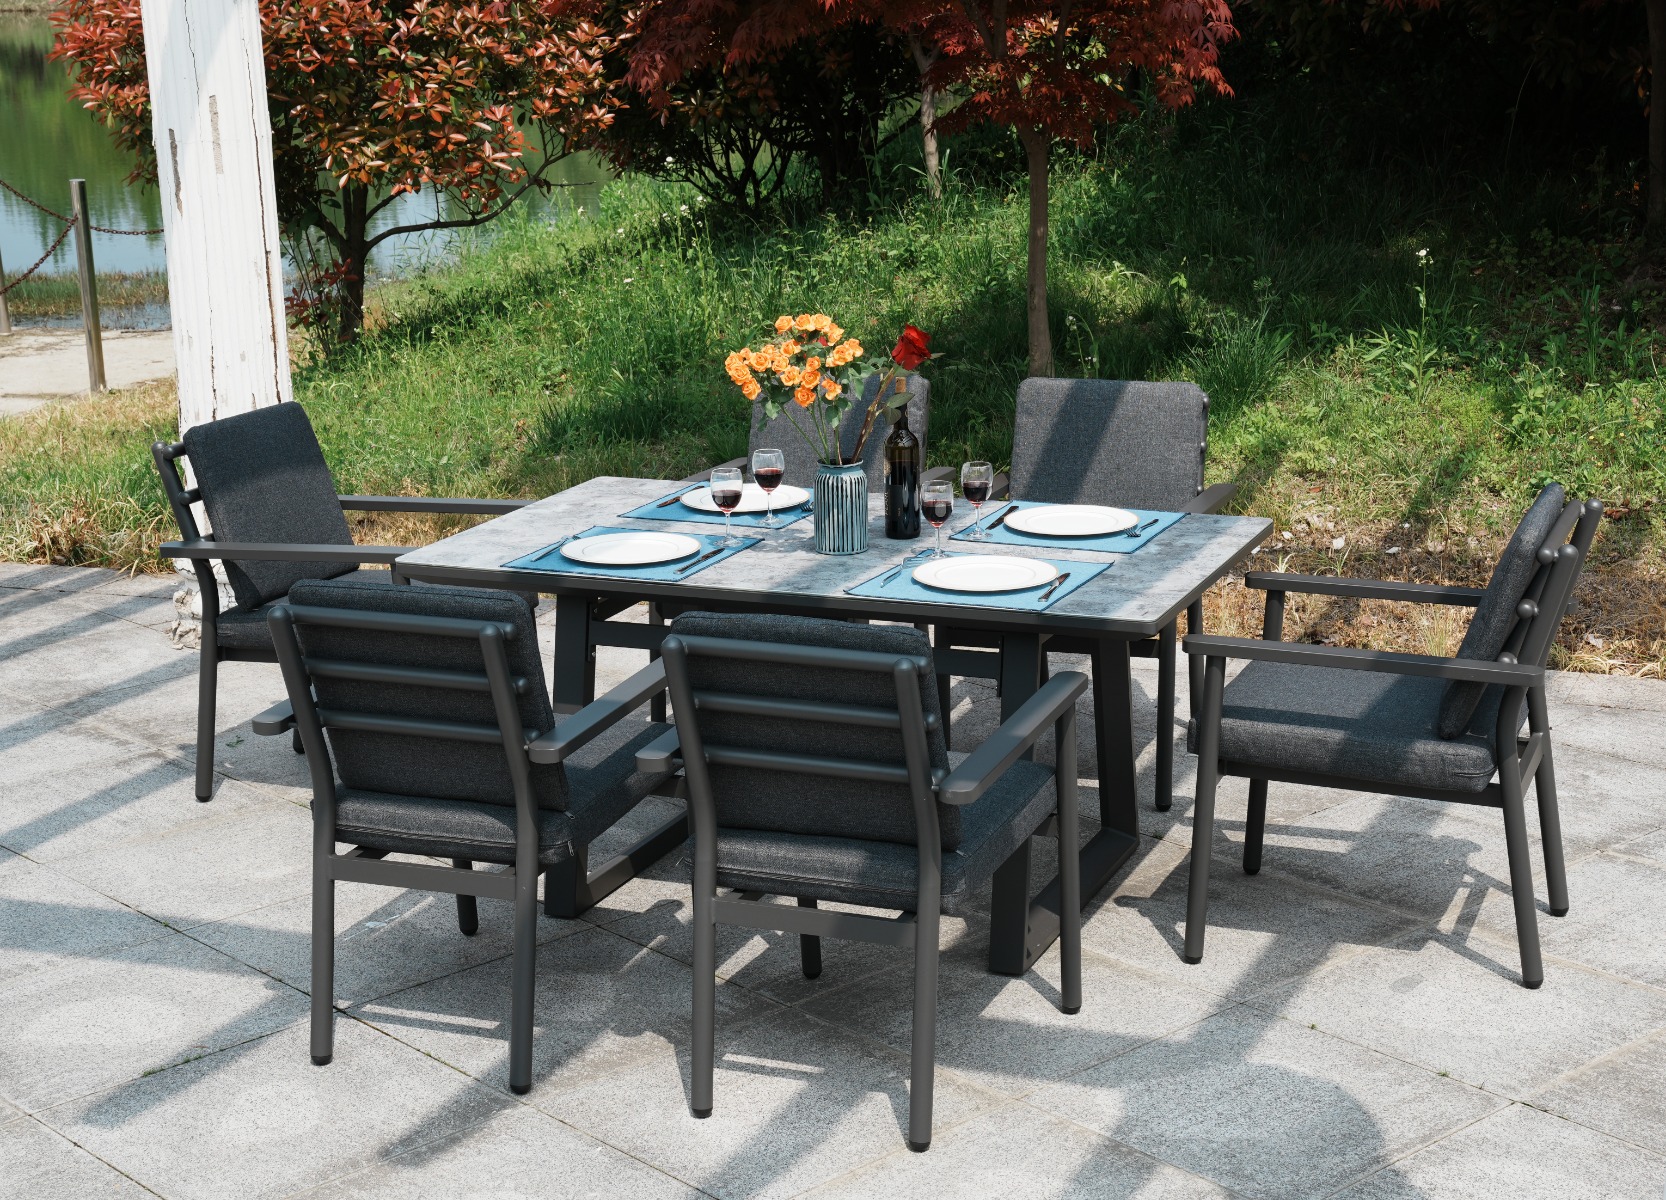 Deluxe Aluminium 6 Seat Dining Set with Patterned Table Top